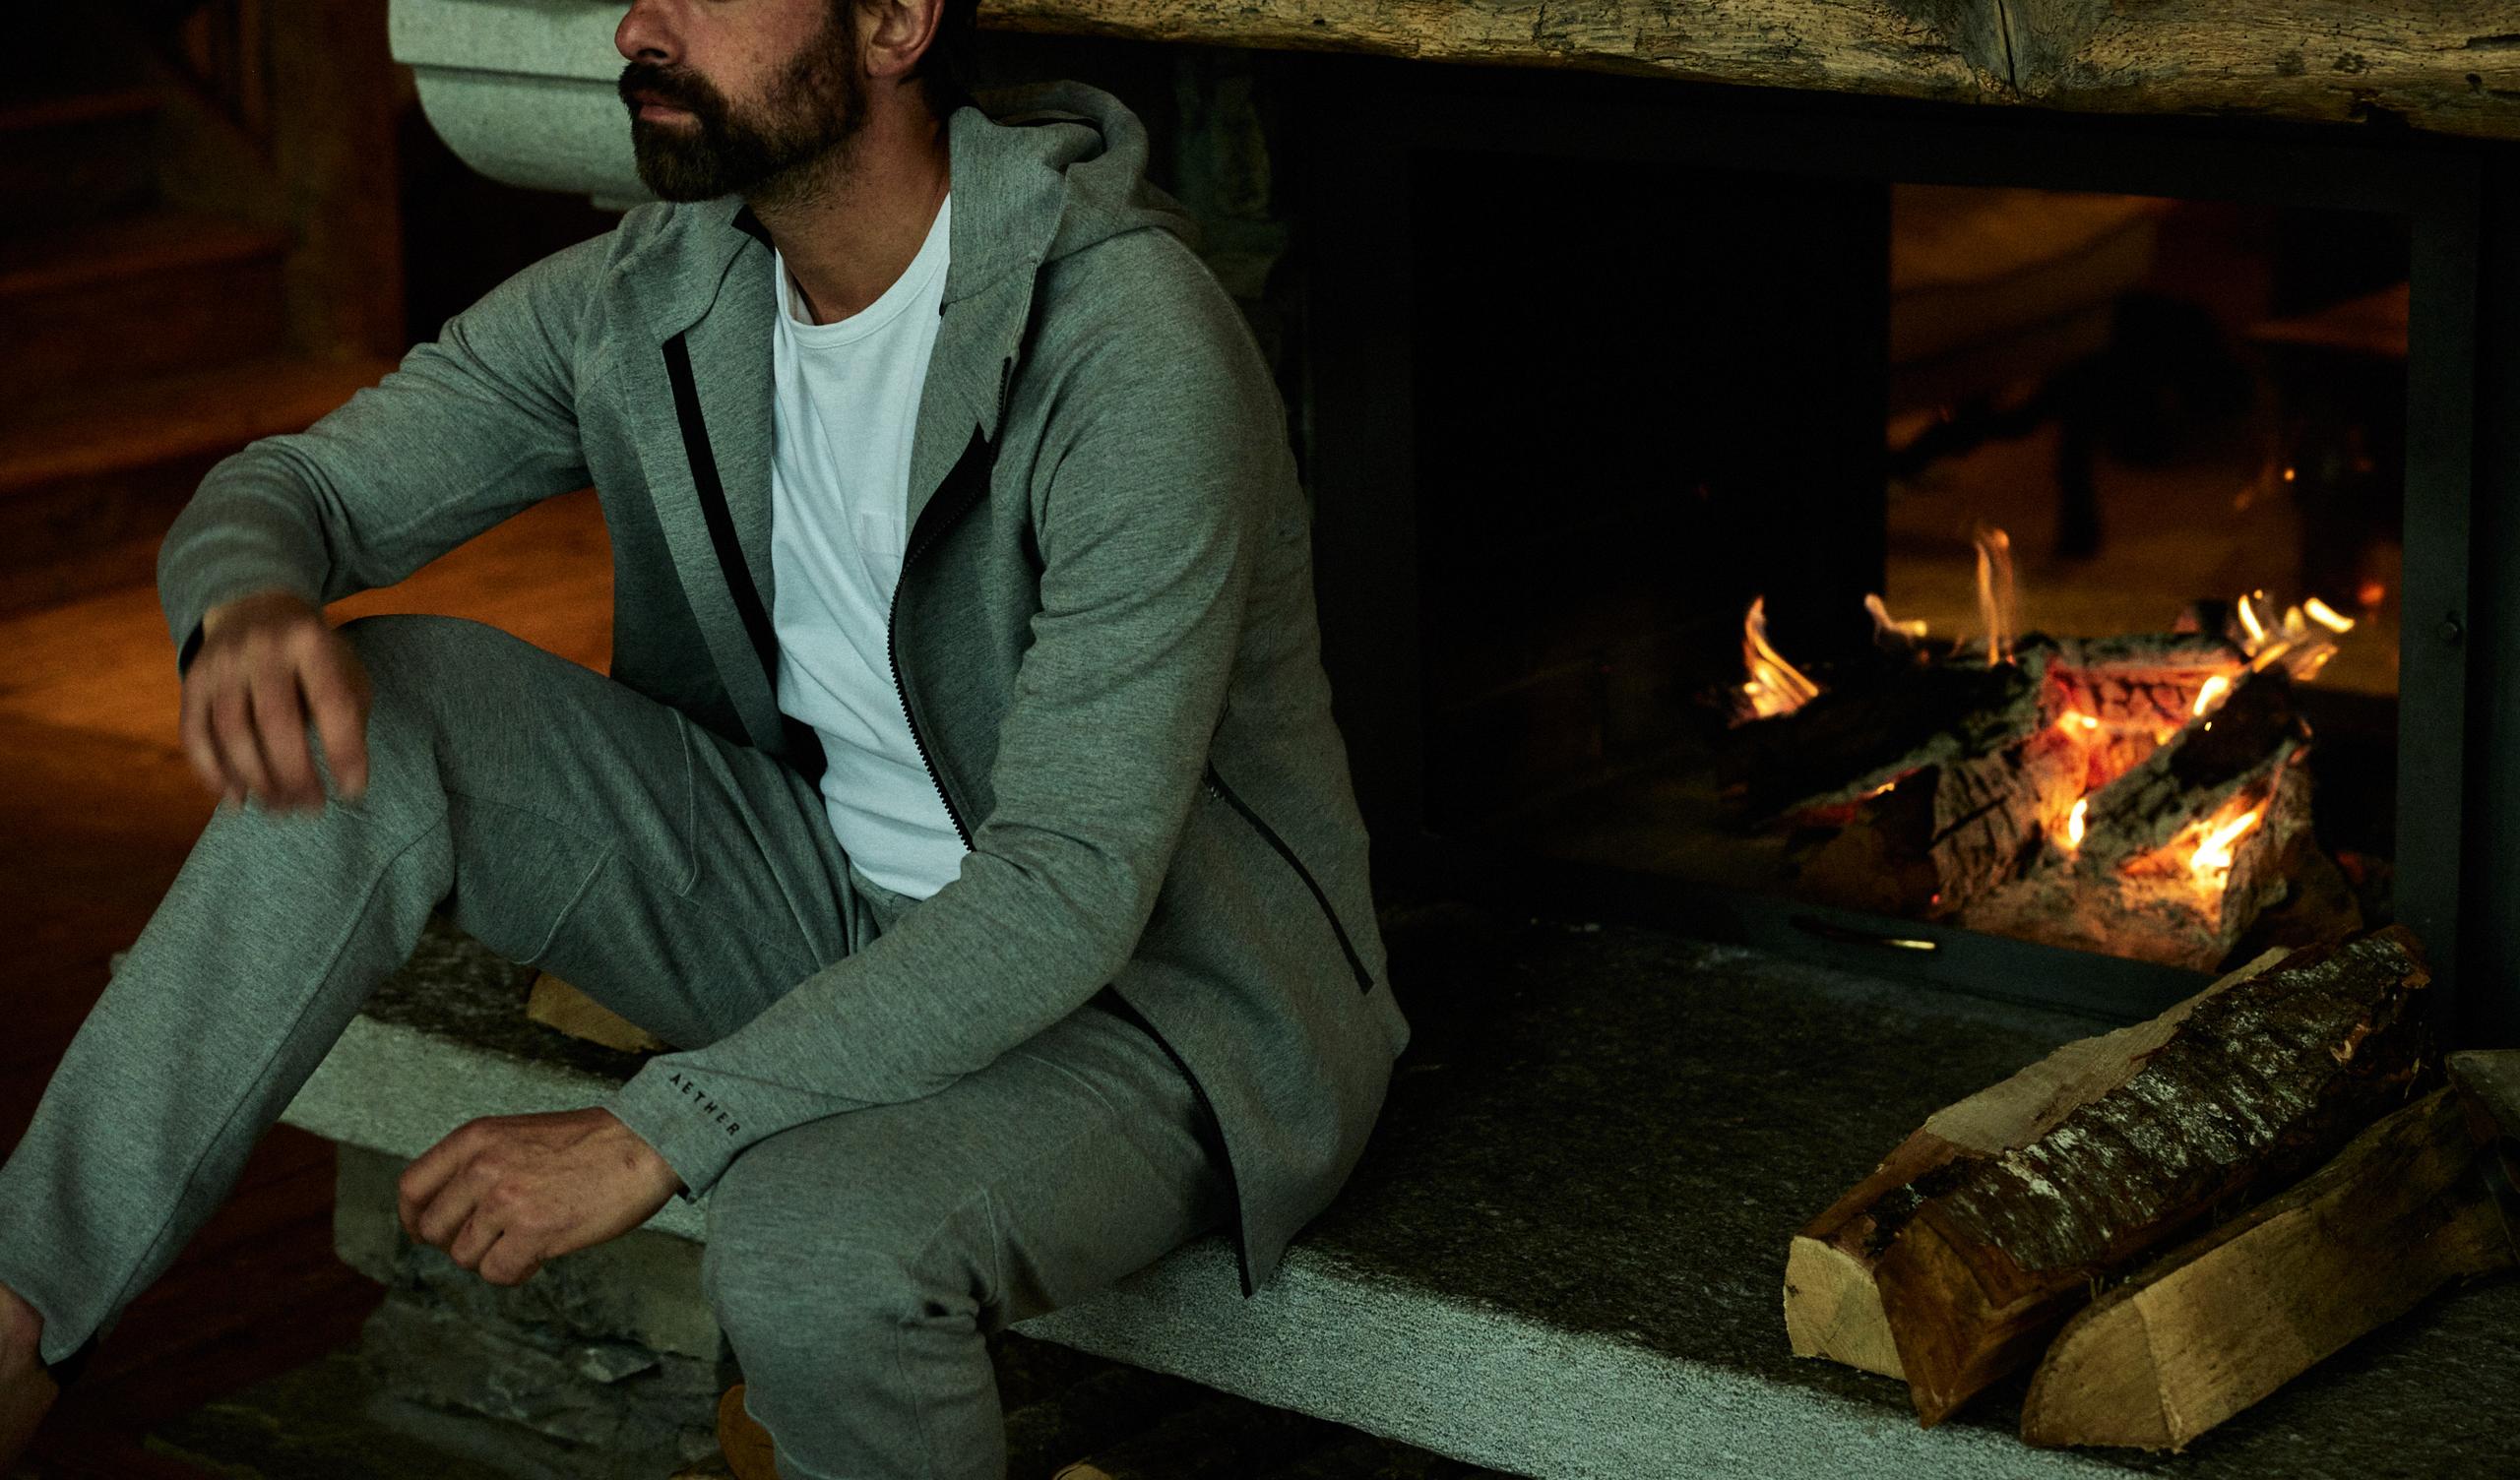 Man wearing Forge Hoodie and Pant in front of fireplace